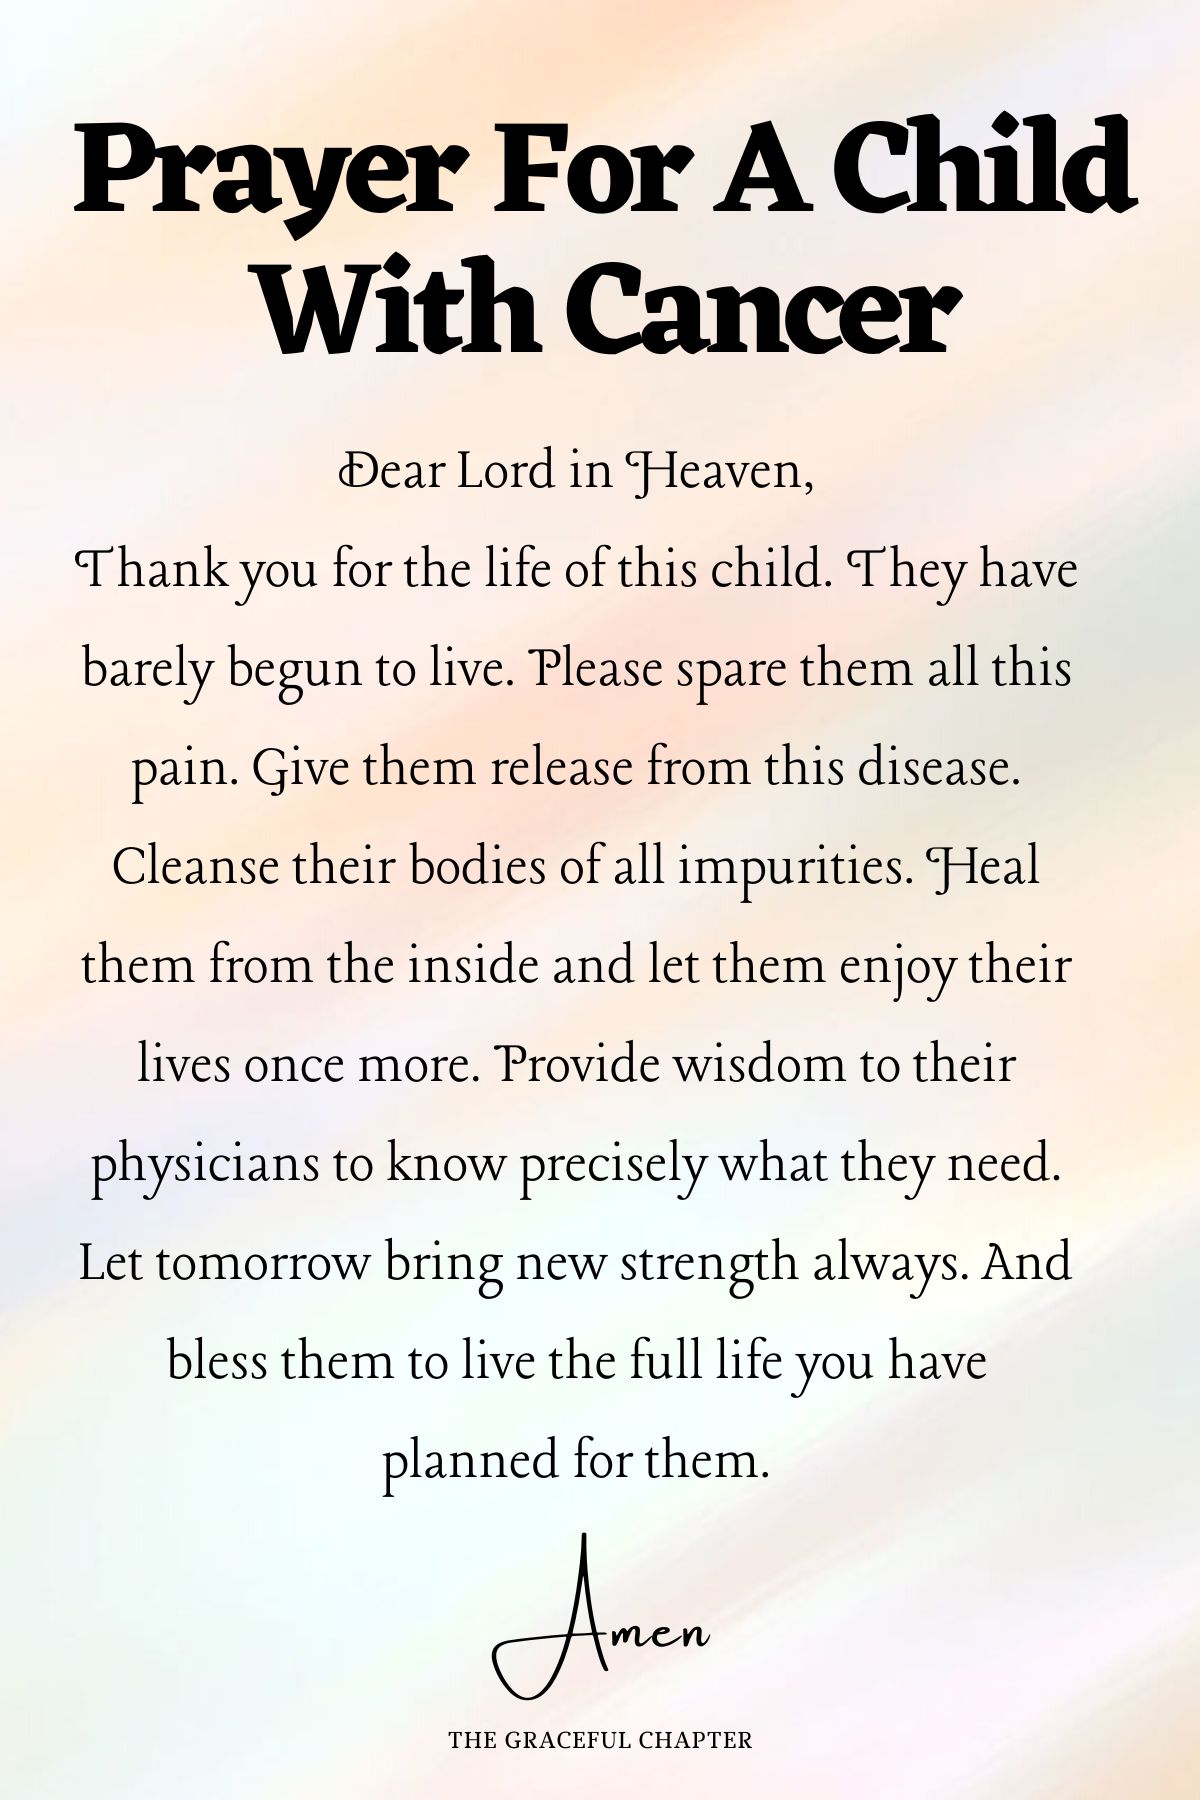 Prayer For A Child With Cancer